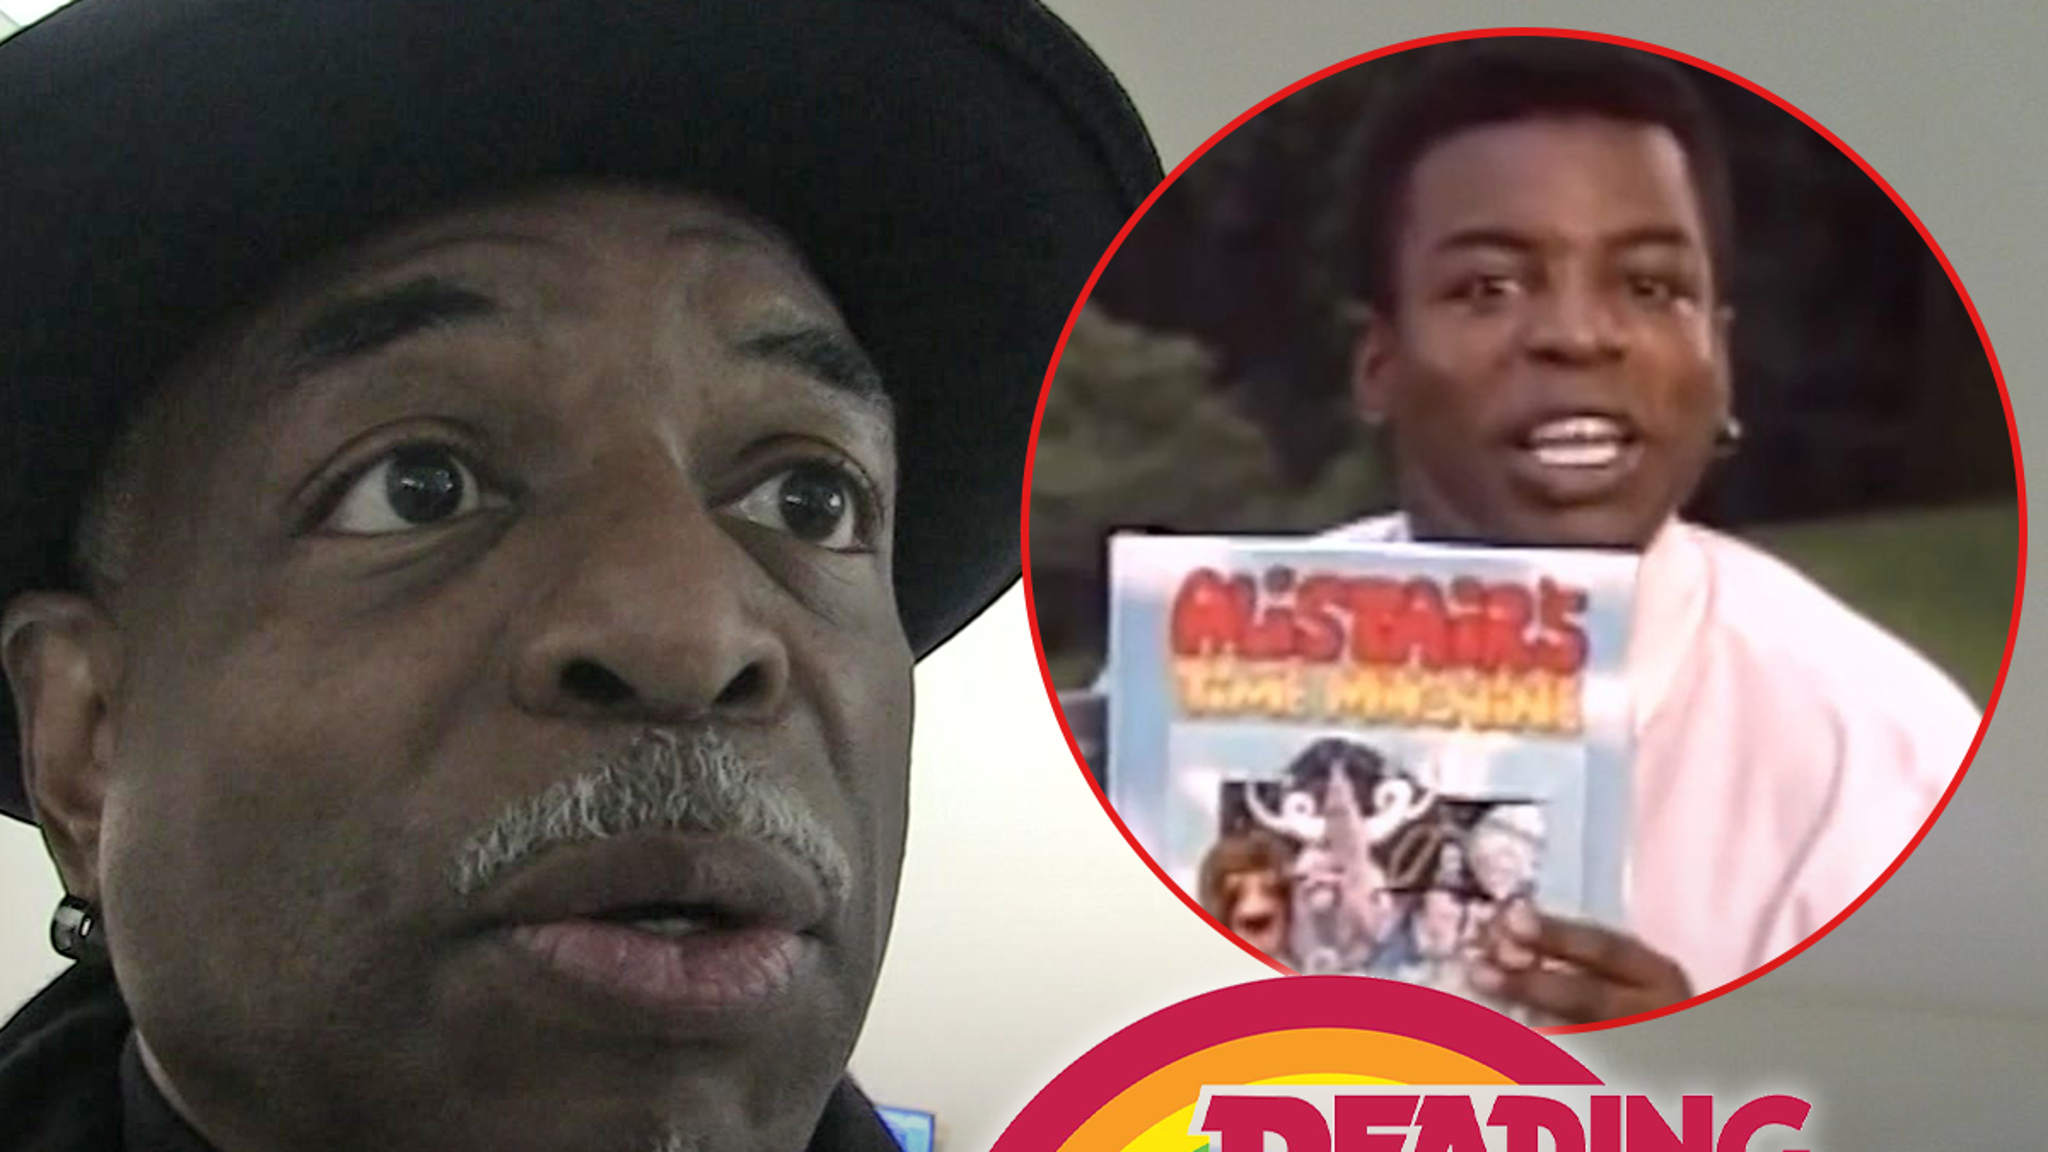 LeVar Burton Says Earring, New Looks Caused Clashes at ‘Reading Rainbow’